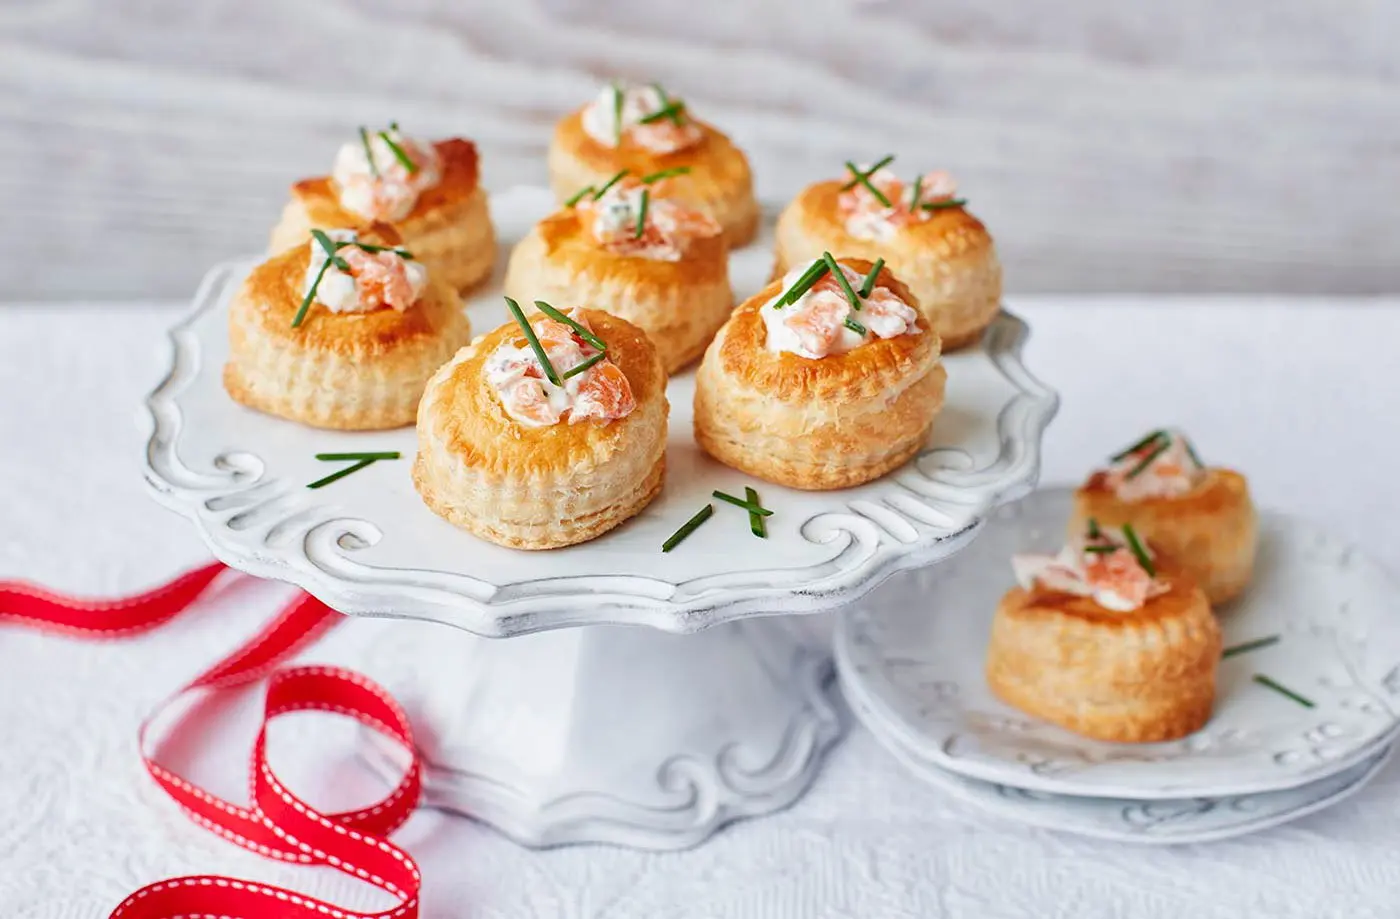 smoked salmon vol au vent recipe - What is vol-au-vent sauce made of